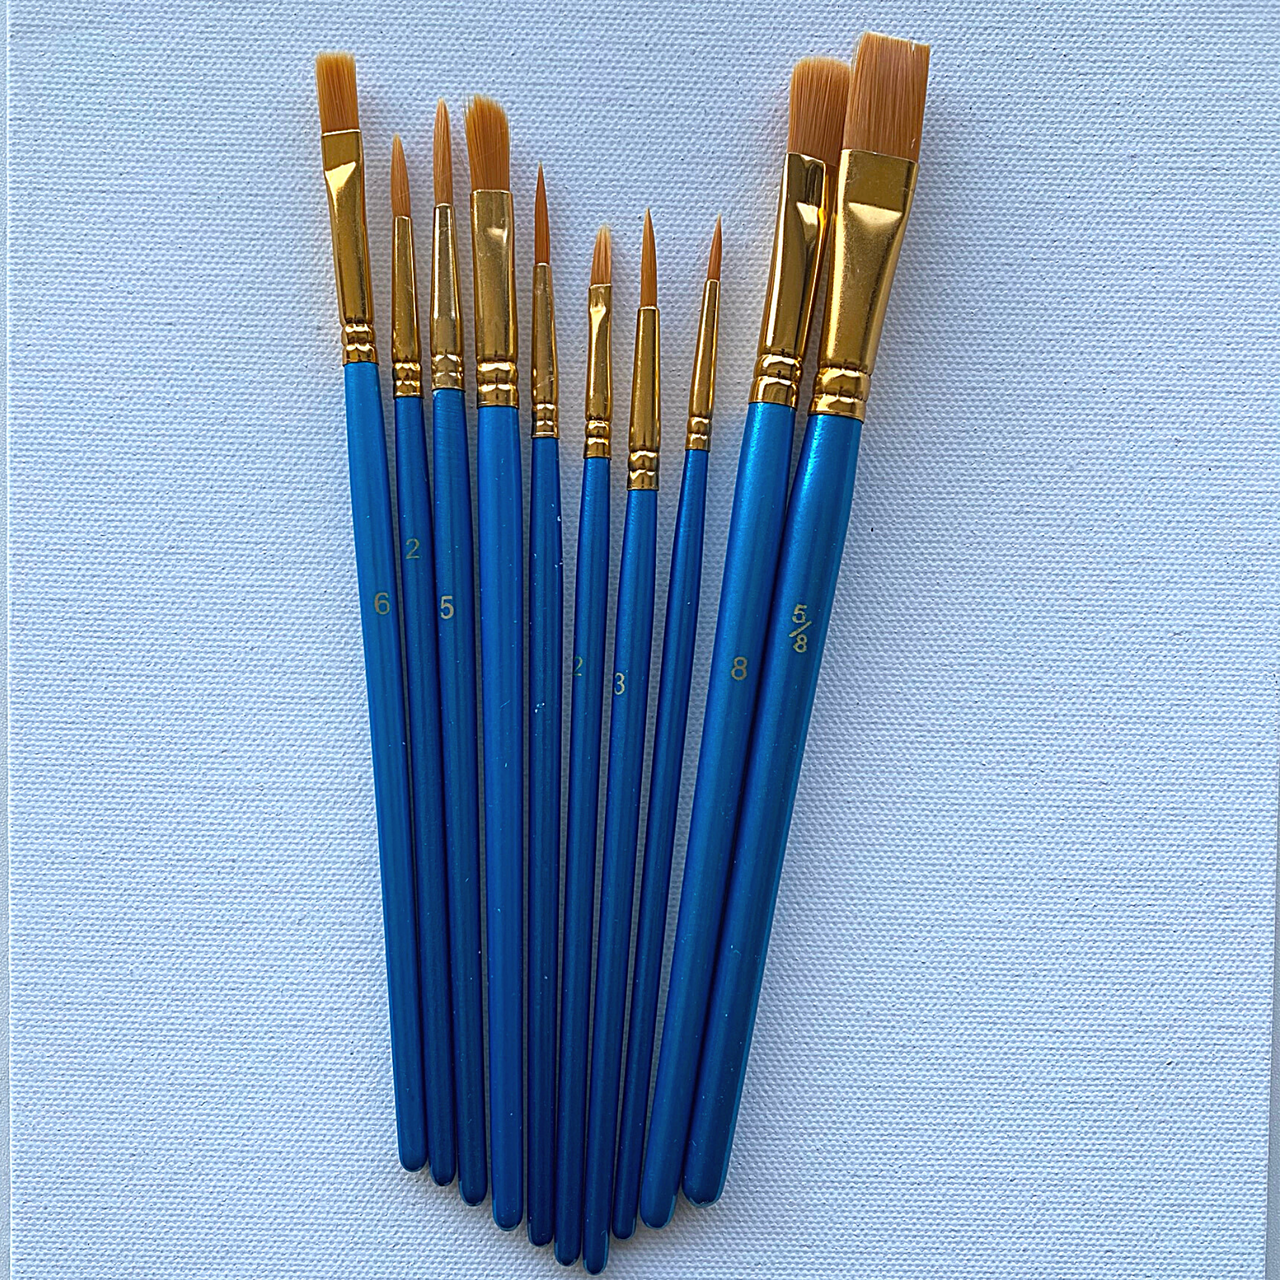 10 Pack Paint Brushes for Acrylic Painting Small Paint Brush Set Watercolor  Brushes Oil Paint Brushes Detail Paintbrushes Face Paint Brushes Pinceles  para Acrilico Paint Supplies